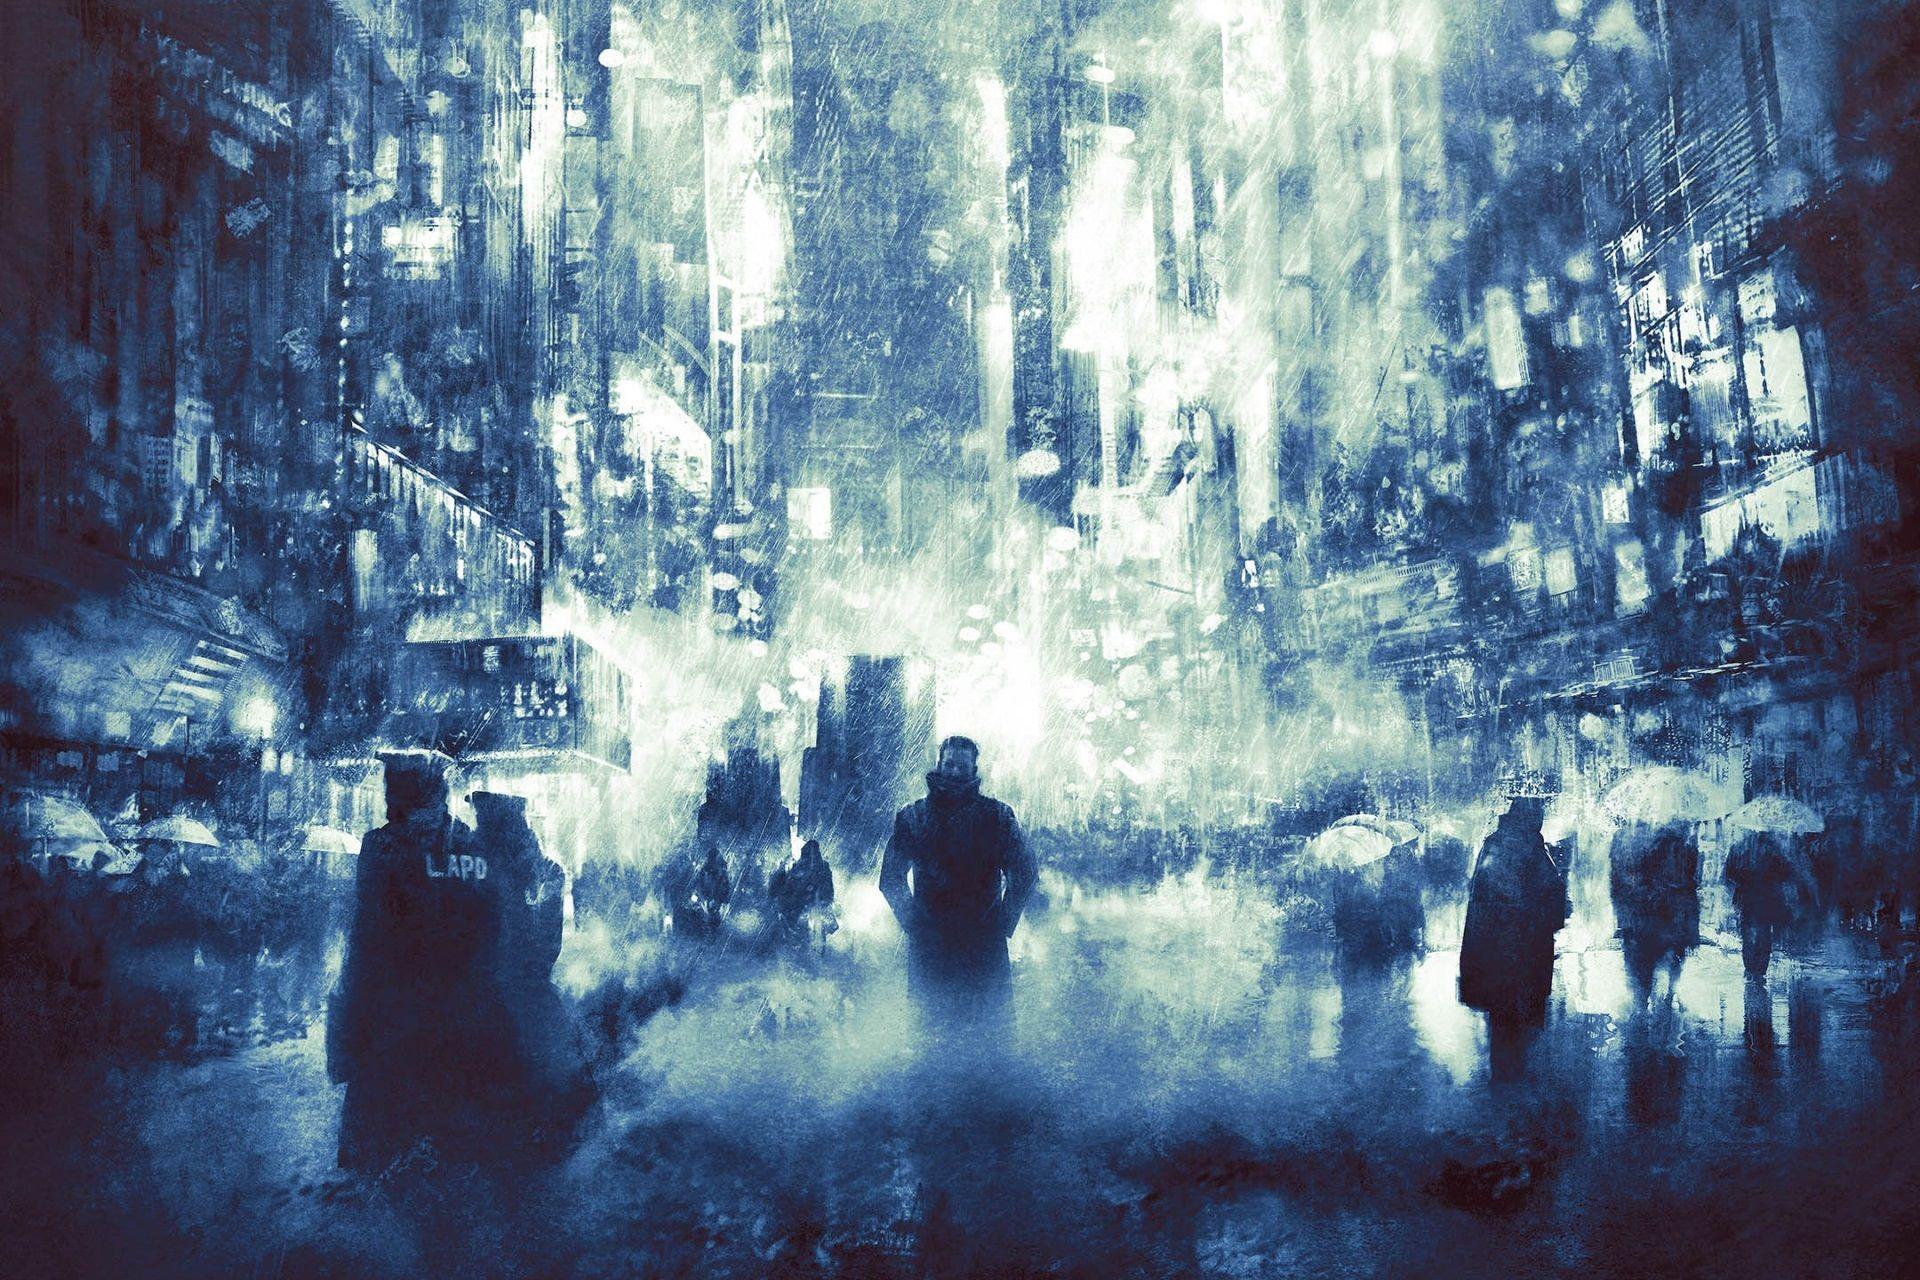 View Blade Runner 2049 Poster 4K Pictures